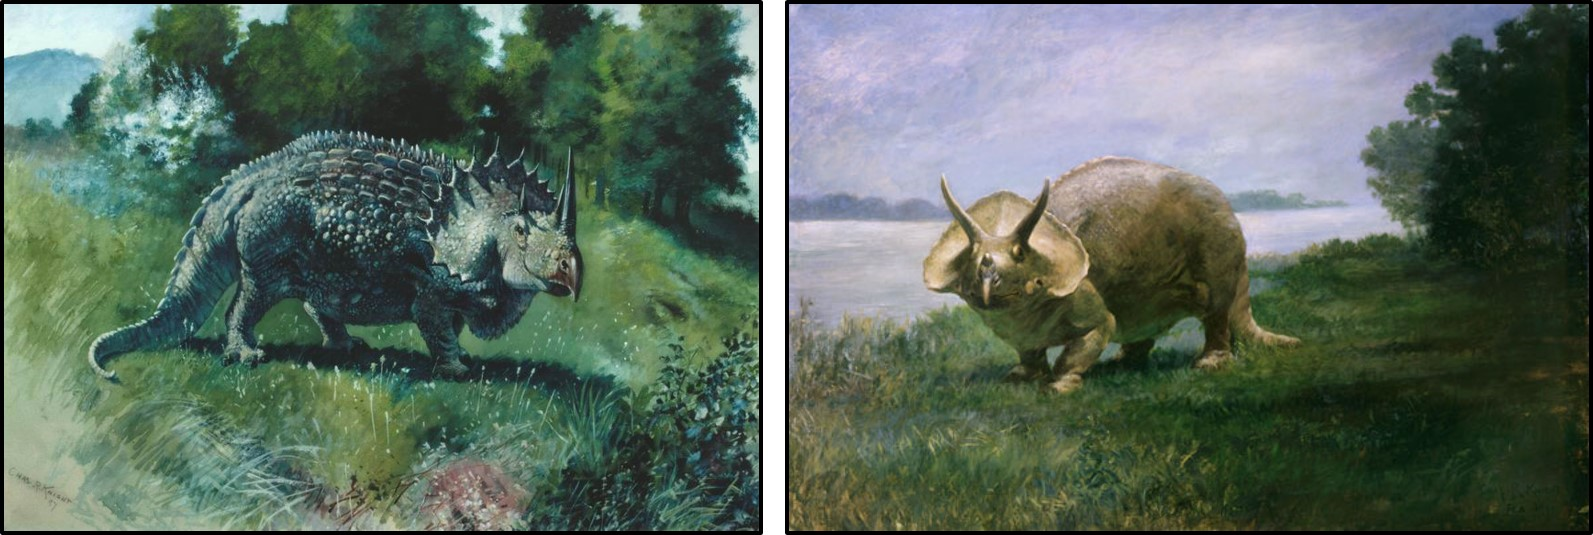 Charles Knight's historic illustrations of Triceratops